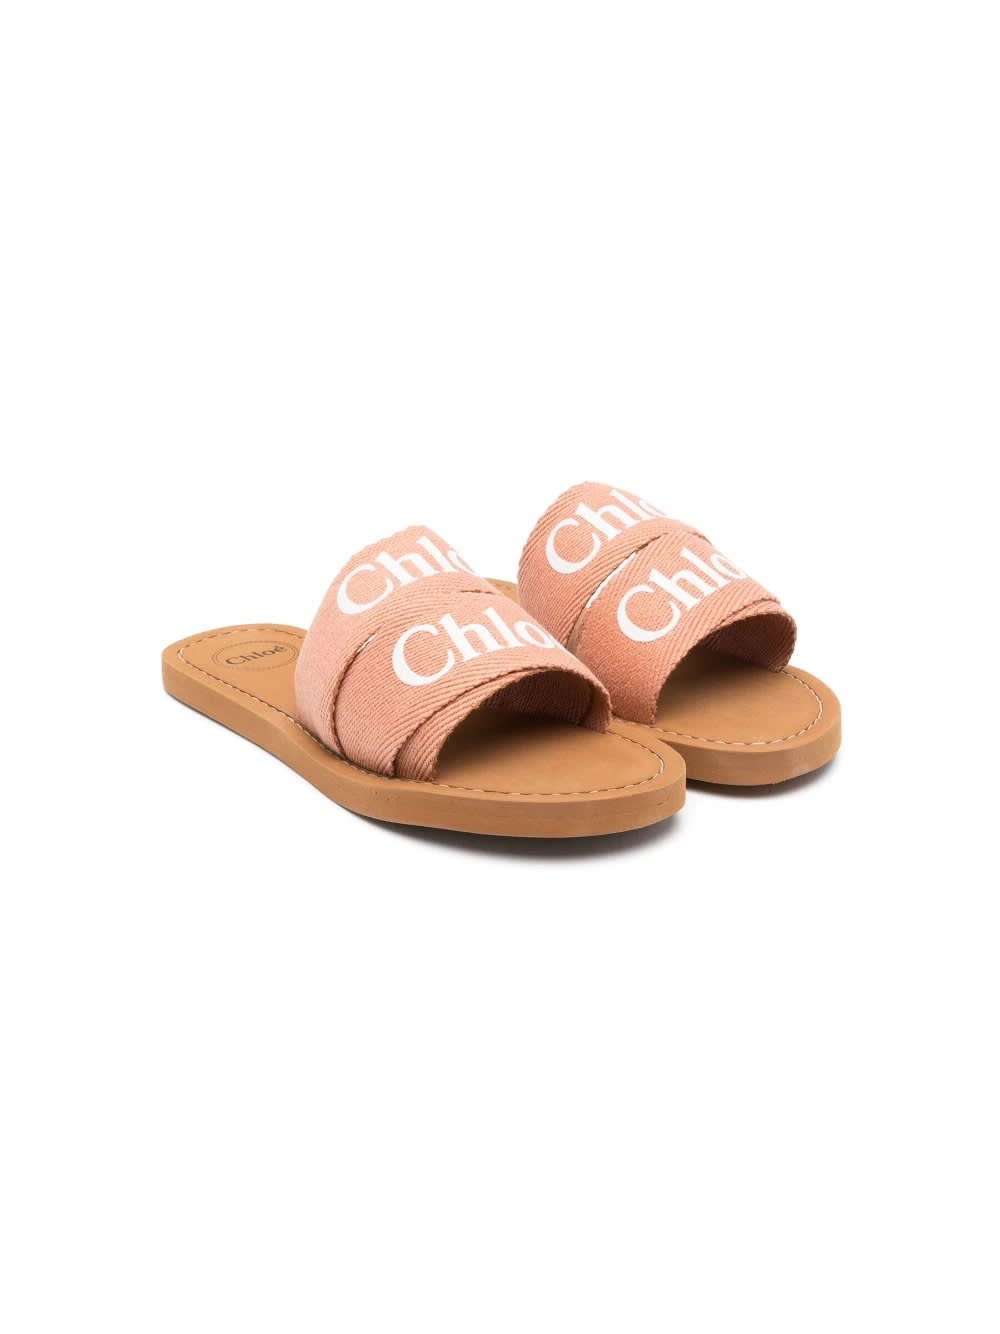 CHLOÉ WOODY SANDAL IN BROWN LINEN WITH LOGO 